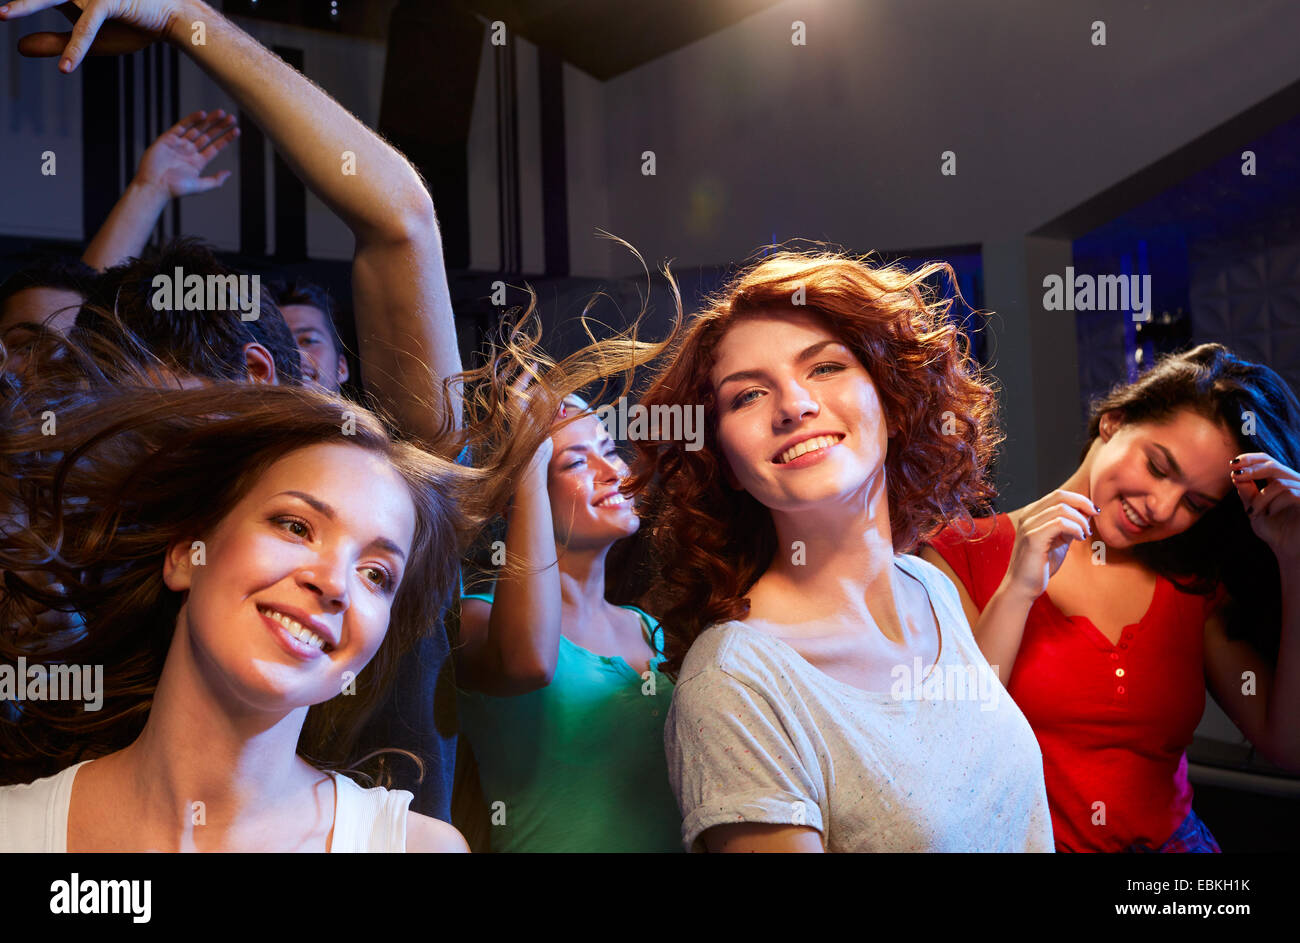 Smiling friends dancing in club Banque D'Images